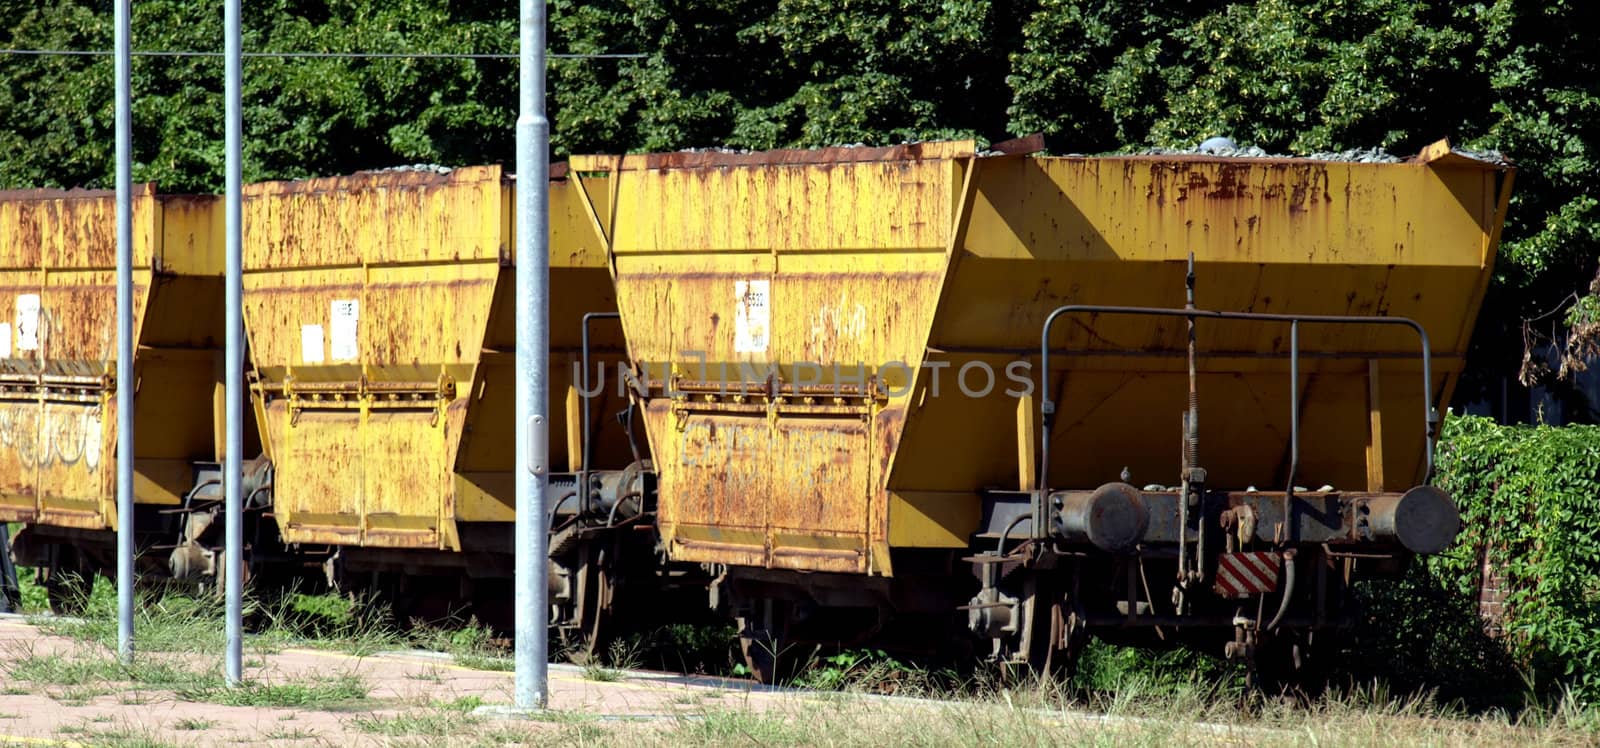 Yellow cargo train wagons at a station